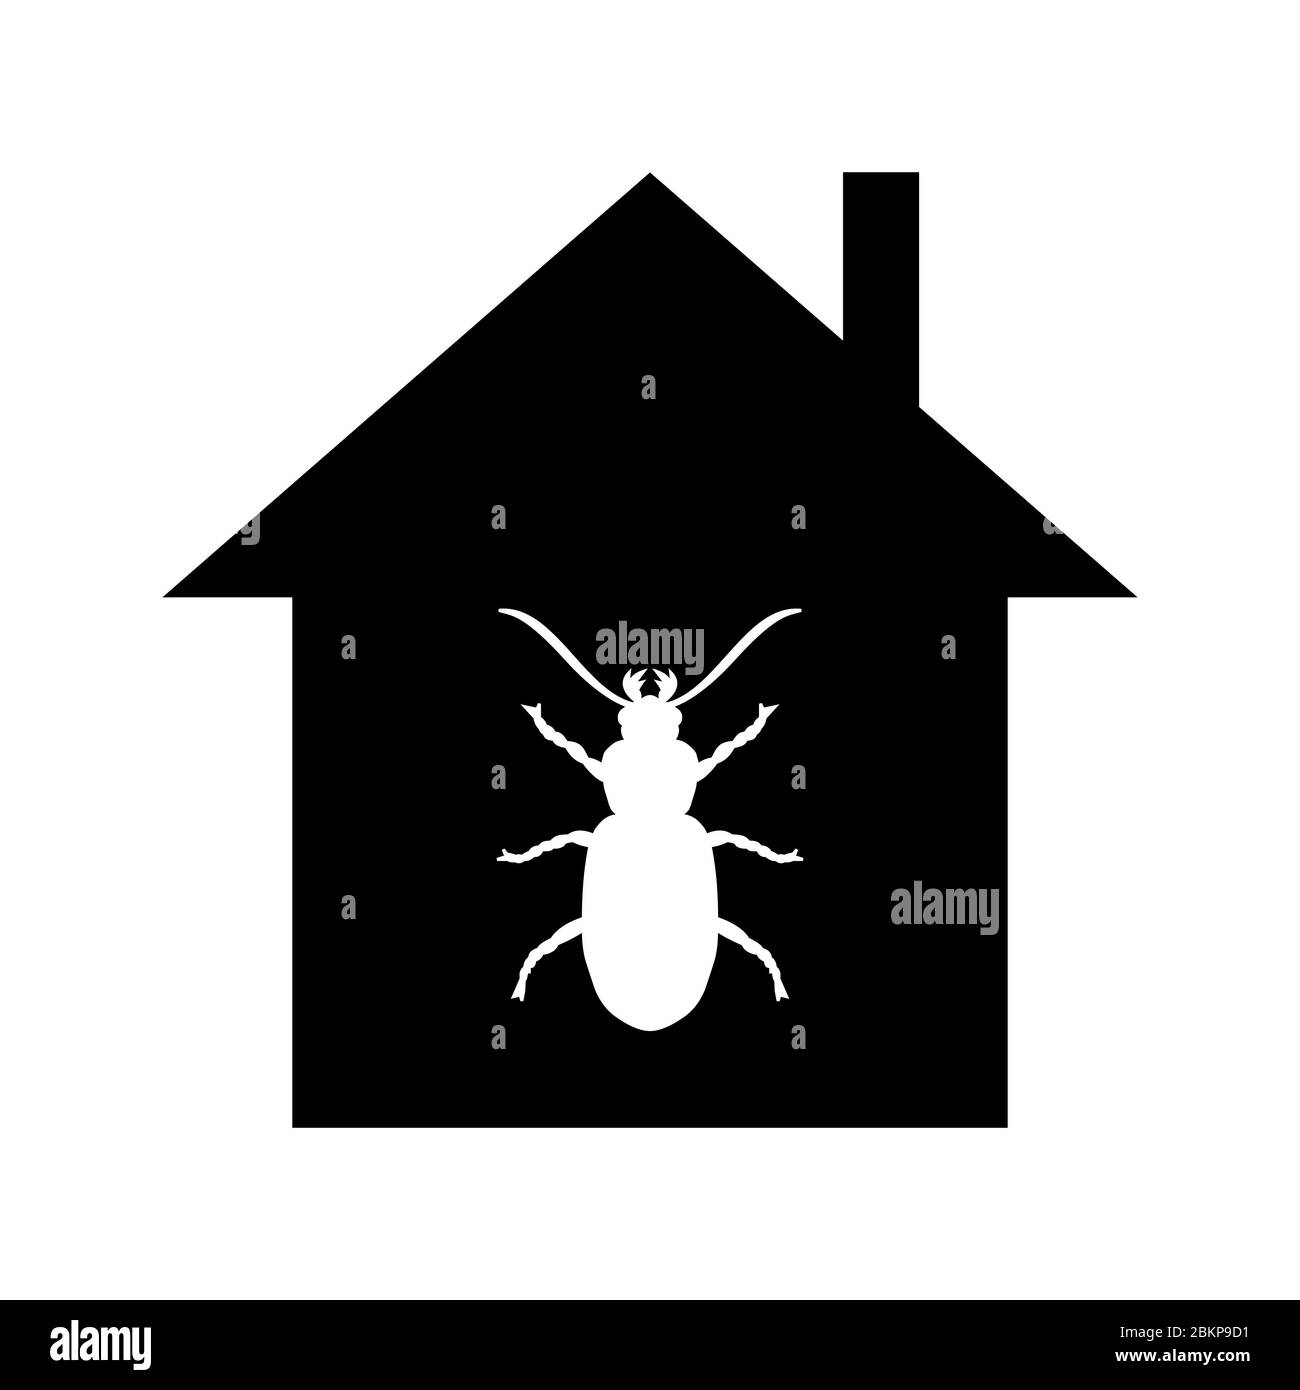 House attacked by beetle, minimalist flat vector illustration icon, symbol for insect damage Stock Vector